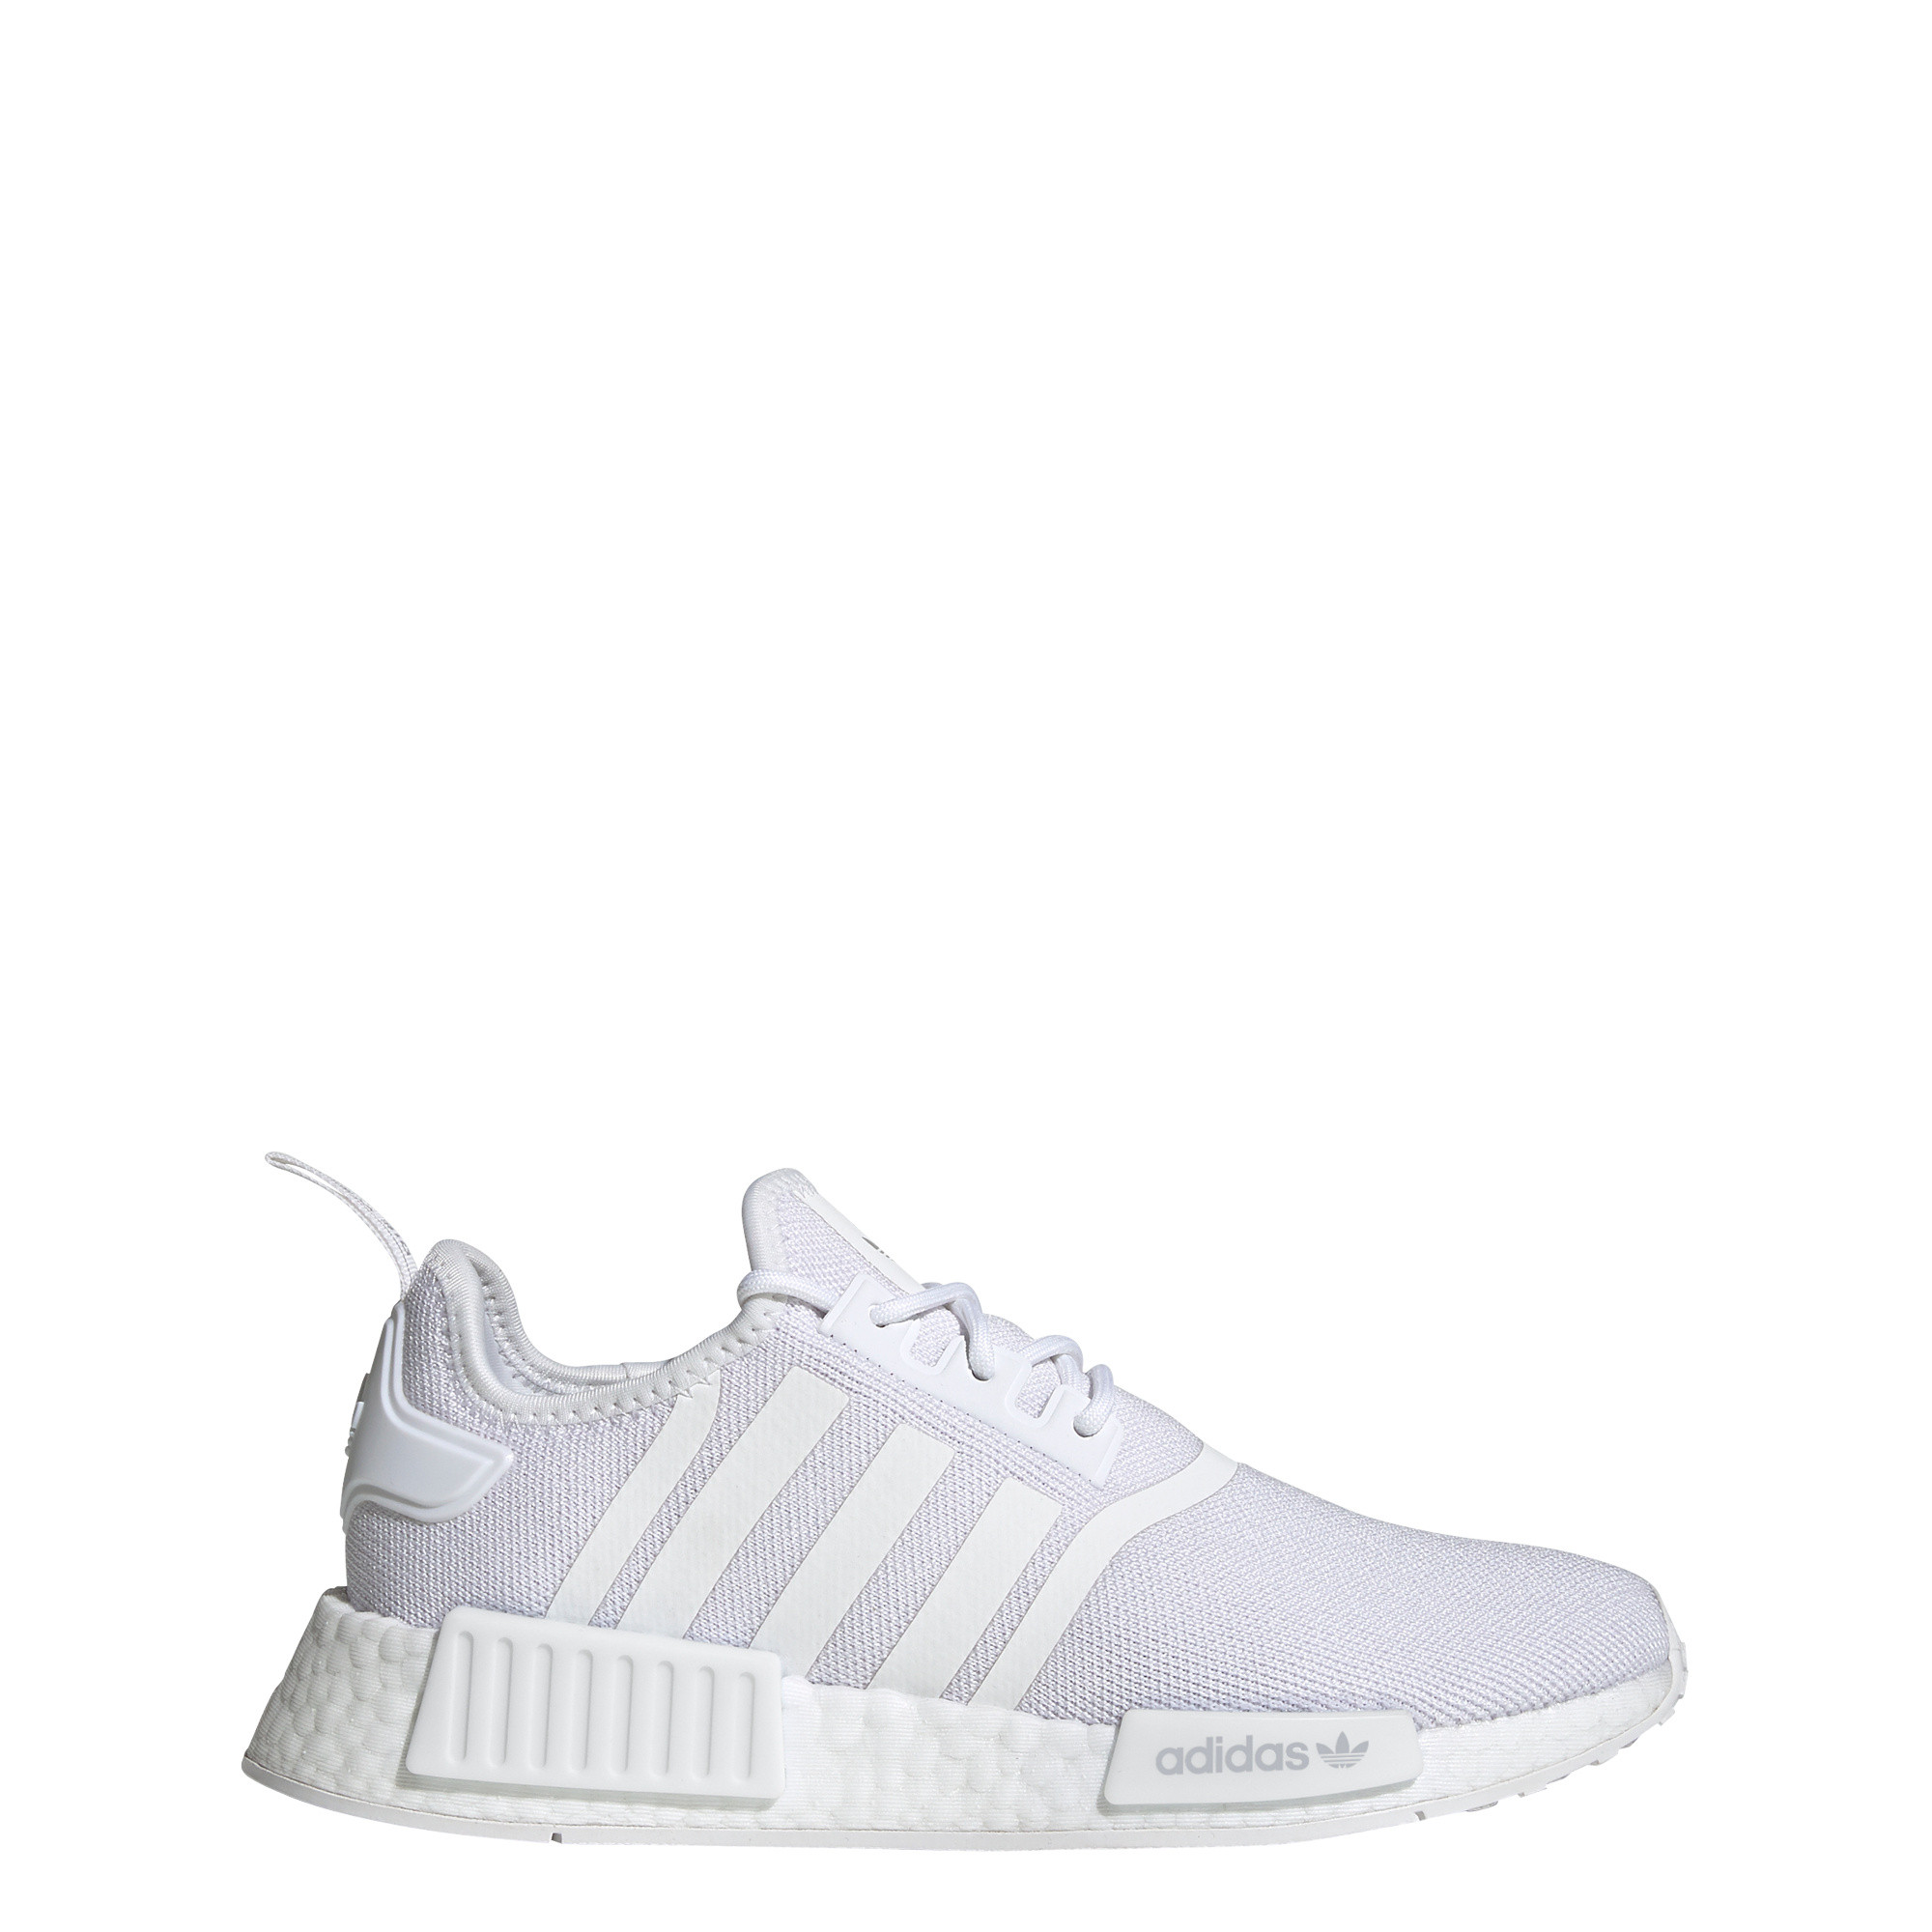 NMD_R1 Primeblue Shoes, White / Grey, large image number 6